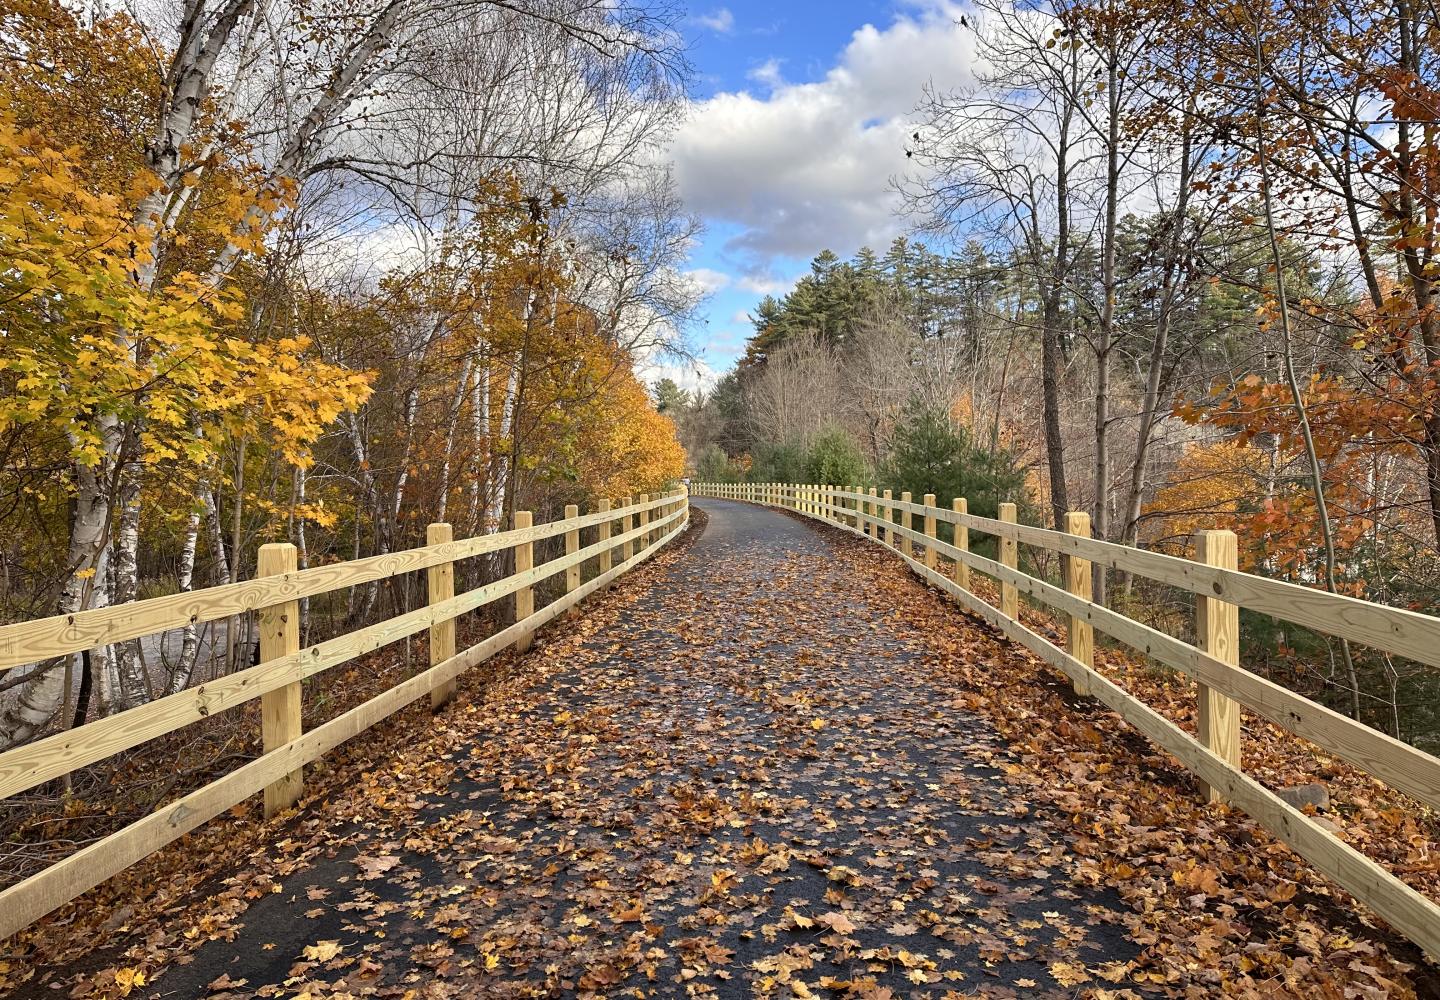 The Adirondack Rail Trail is a 34-mile vehicle free recreational trail connecting the communities of Lake Placid, Ray Brook, Saranac Lake, Lake Clear and Tupper Lake. 